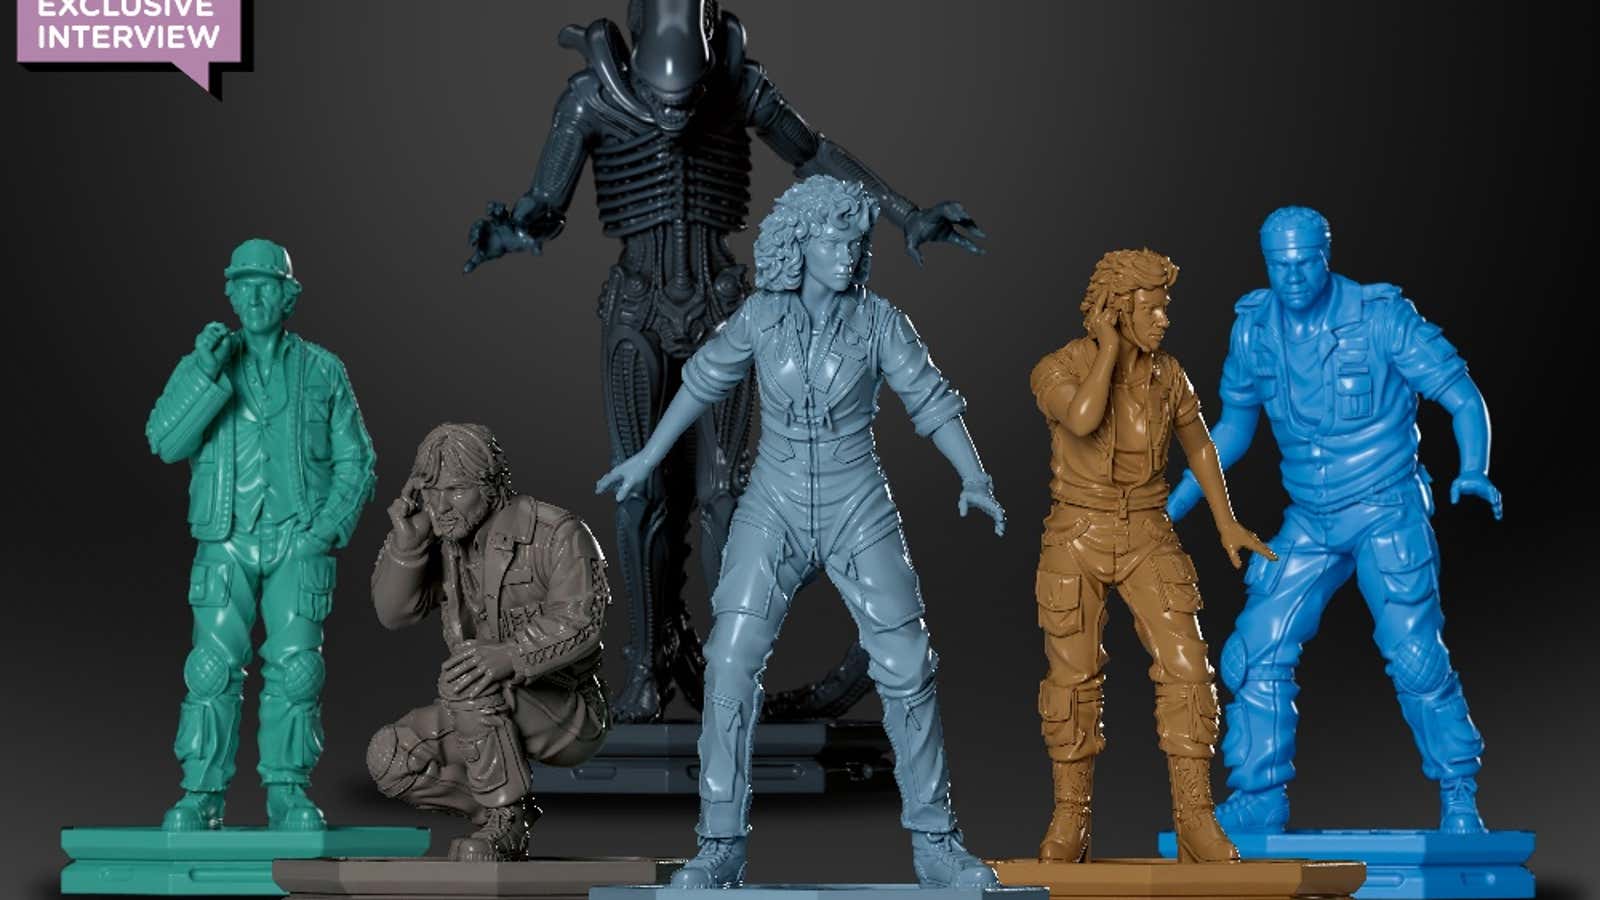 The awesome figures from Alien: Fate of the Nostromo.